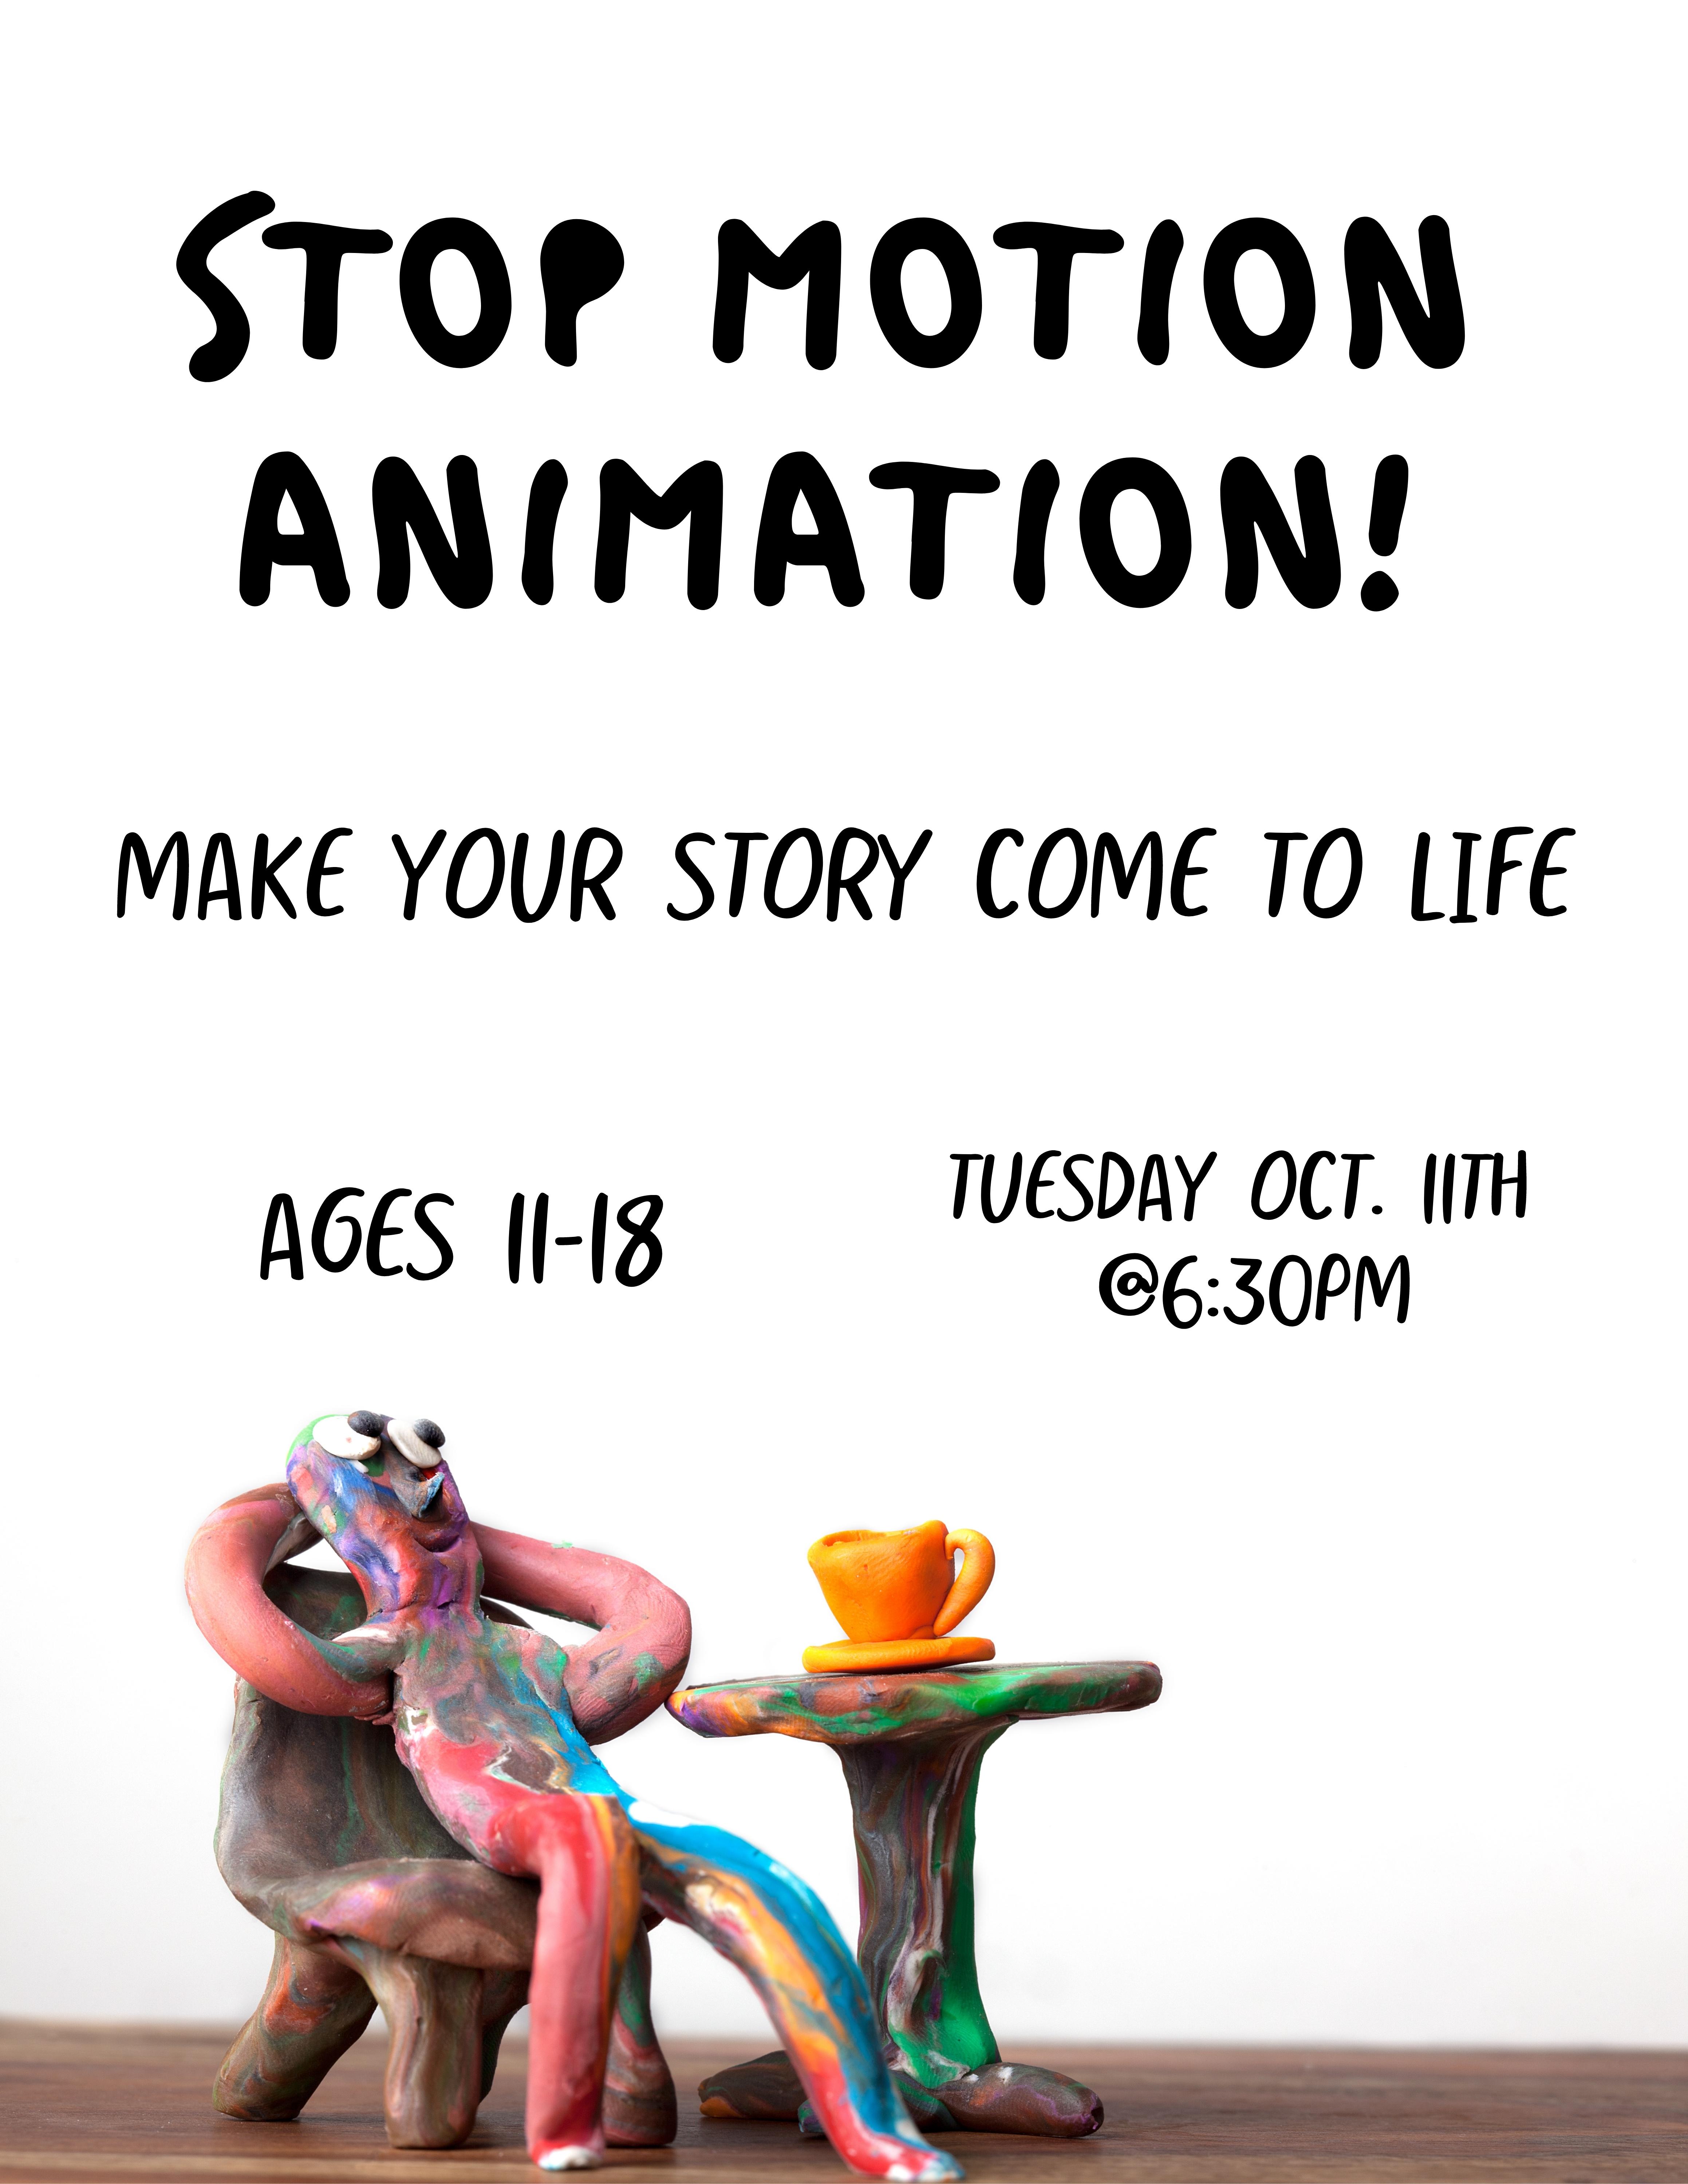 Image of a colorful clay man relaxing in a clay chair against a white background. Text reads: Stop Motion Animation! Make your story come to life. Ages 11-18. Tuesday Oct. 11th @6:30pm.